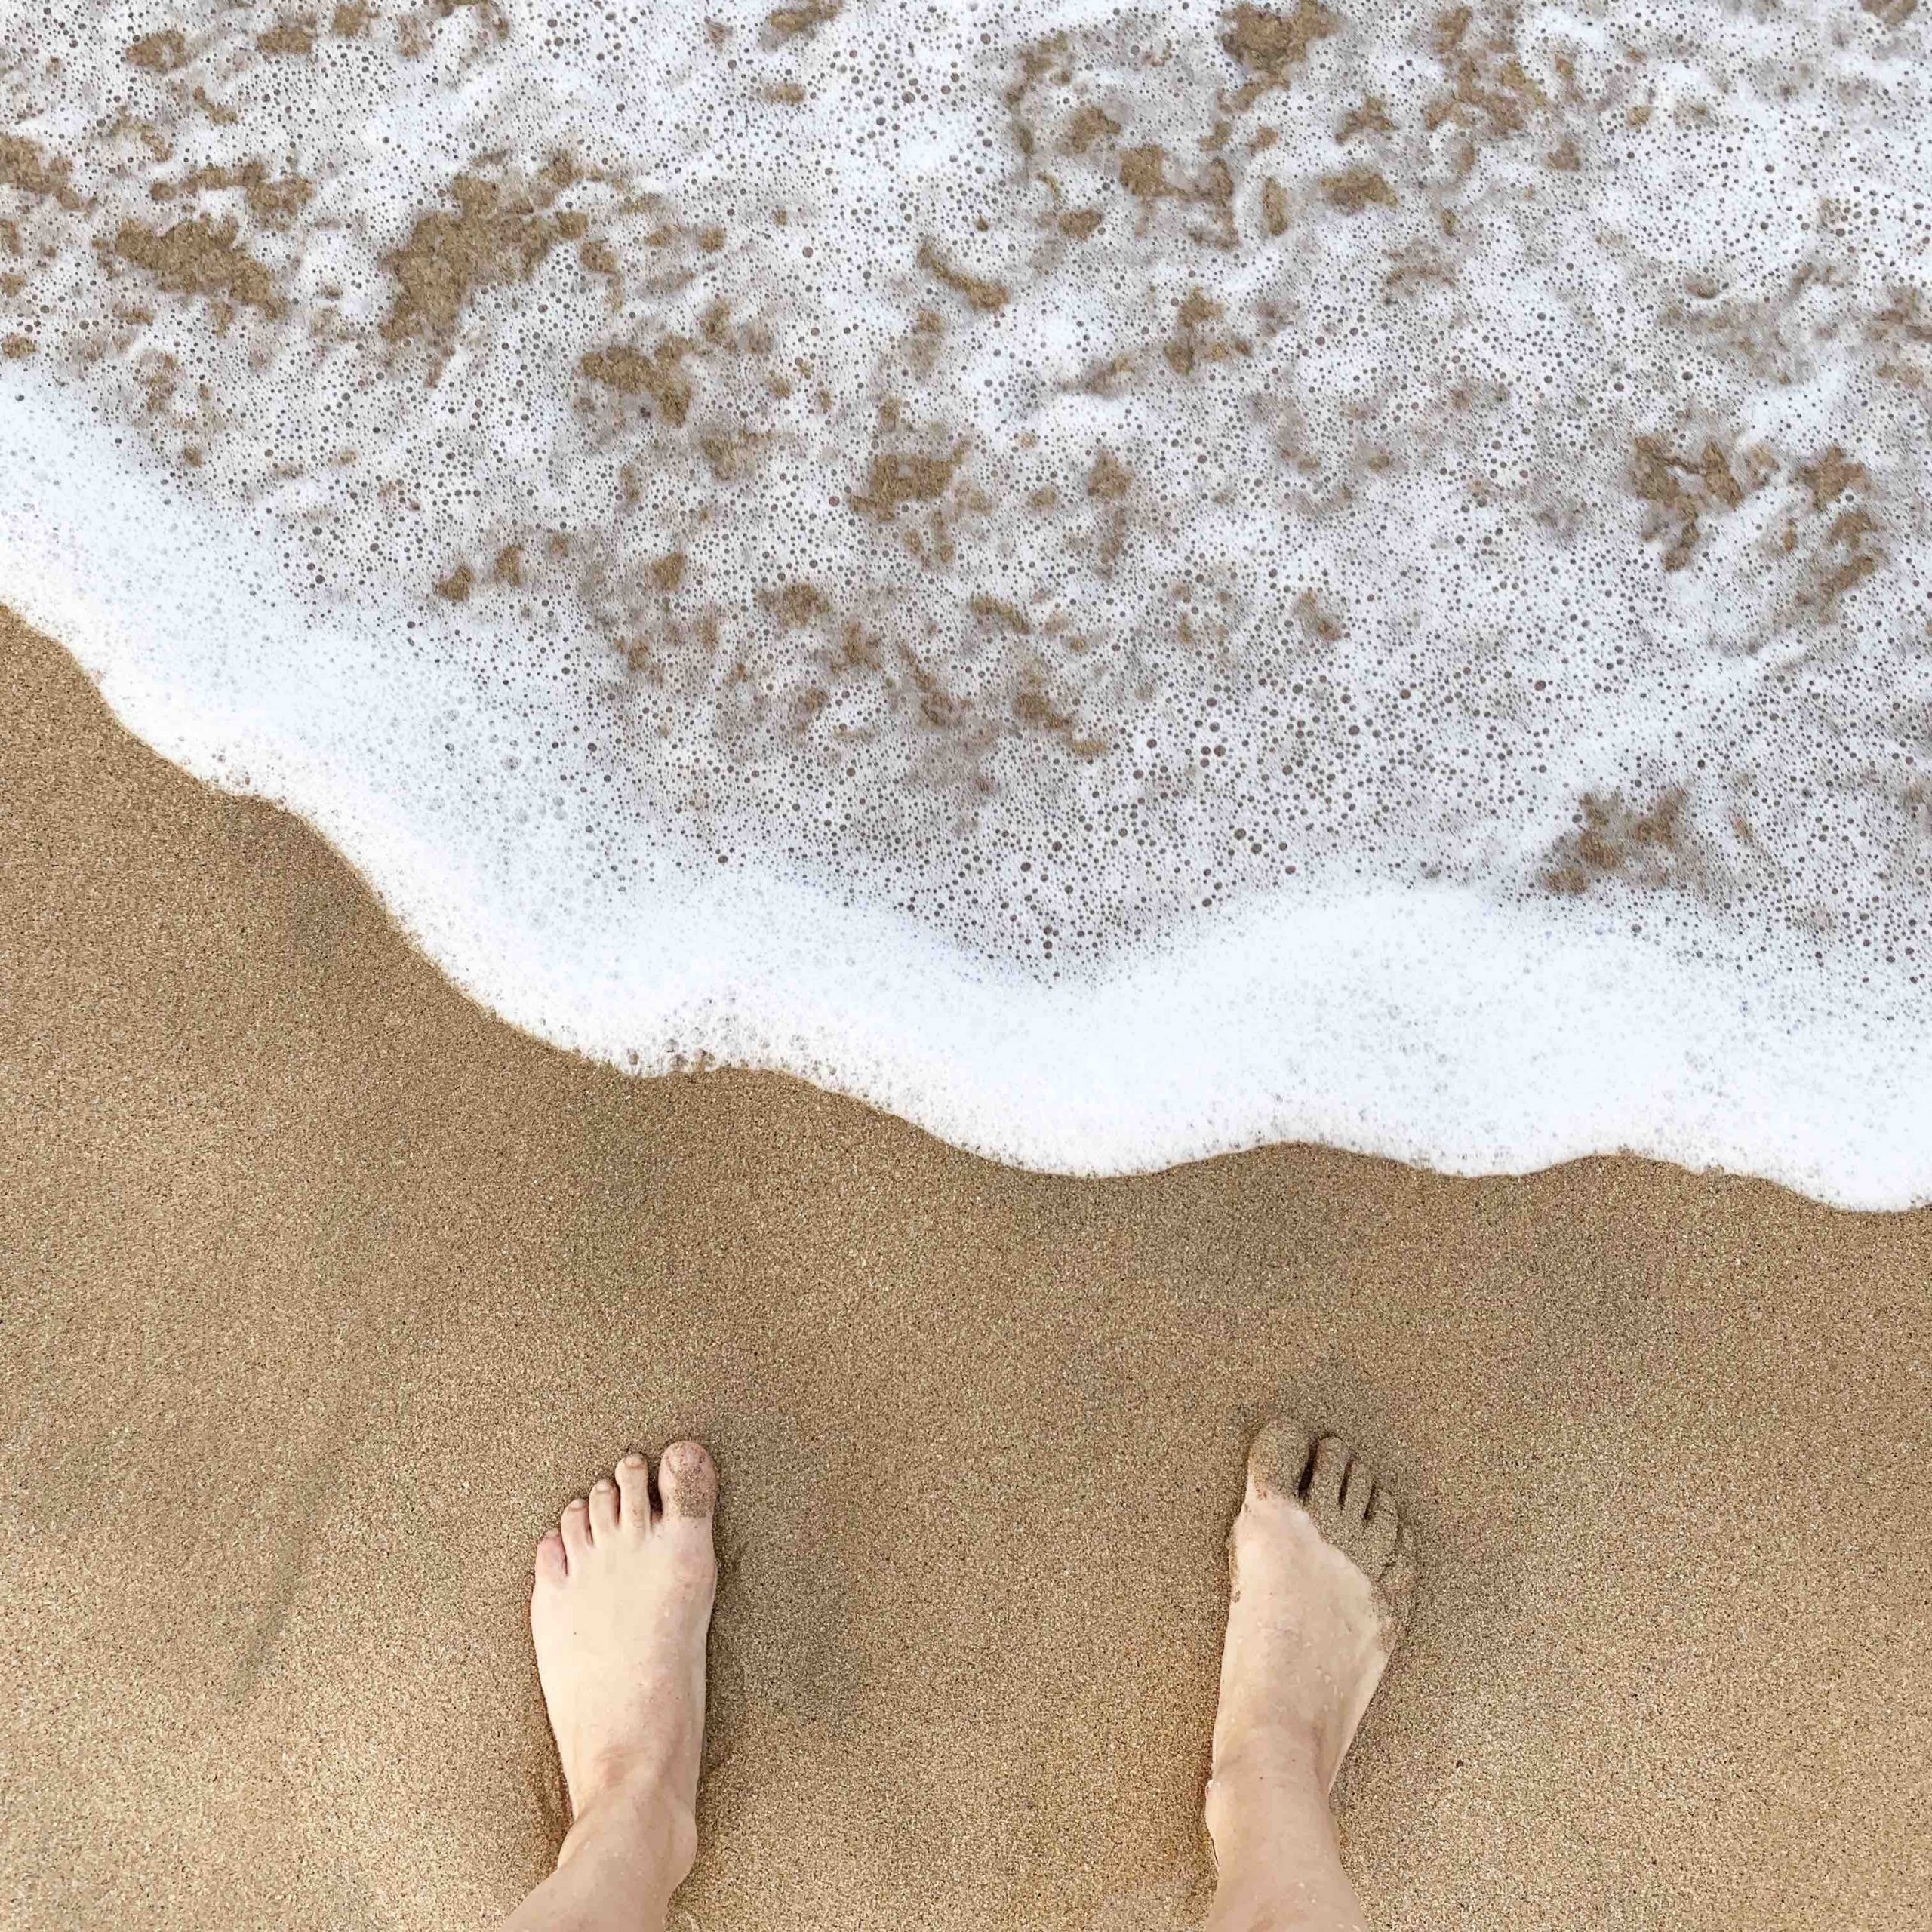 Feet standing in the sand near the waves